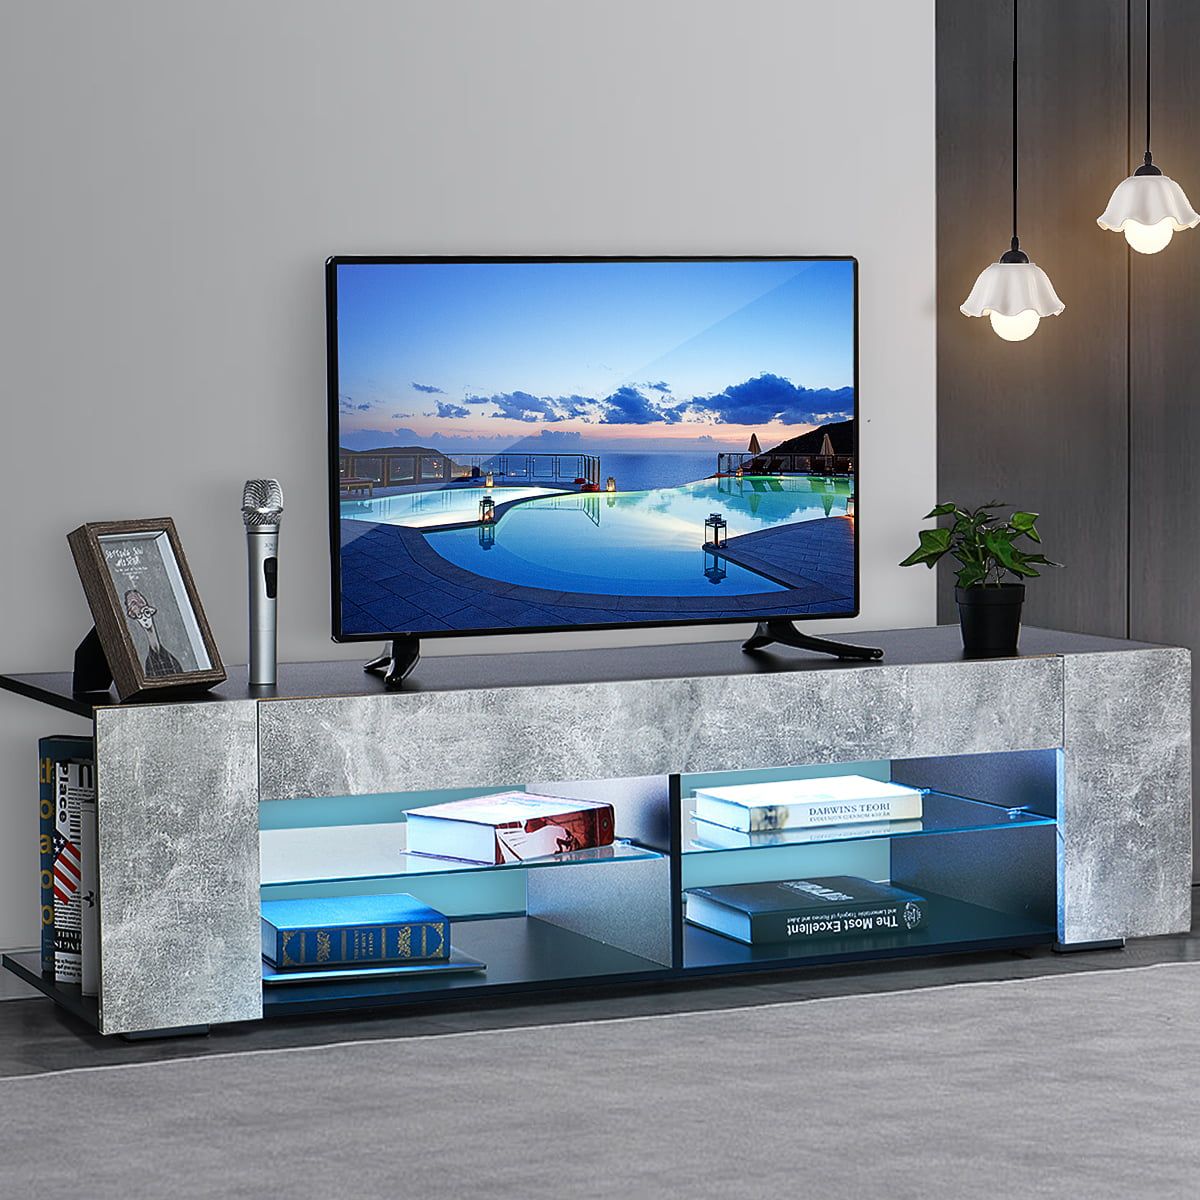 57 Inch Tv Stand With Remote Led Lights, Entertainment Center For Tvs Throughout Tv Stands With Lights (Gallery 4 of 20)